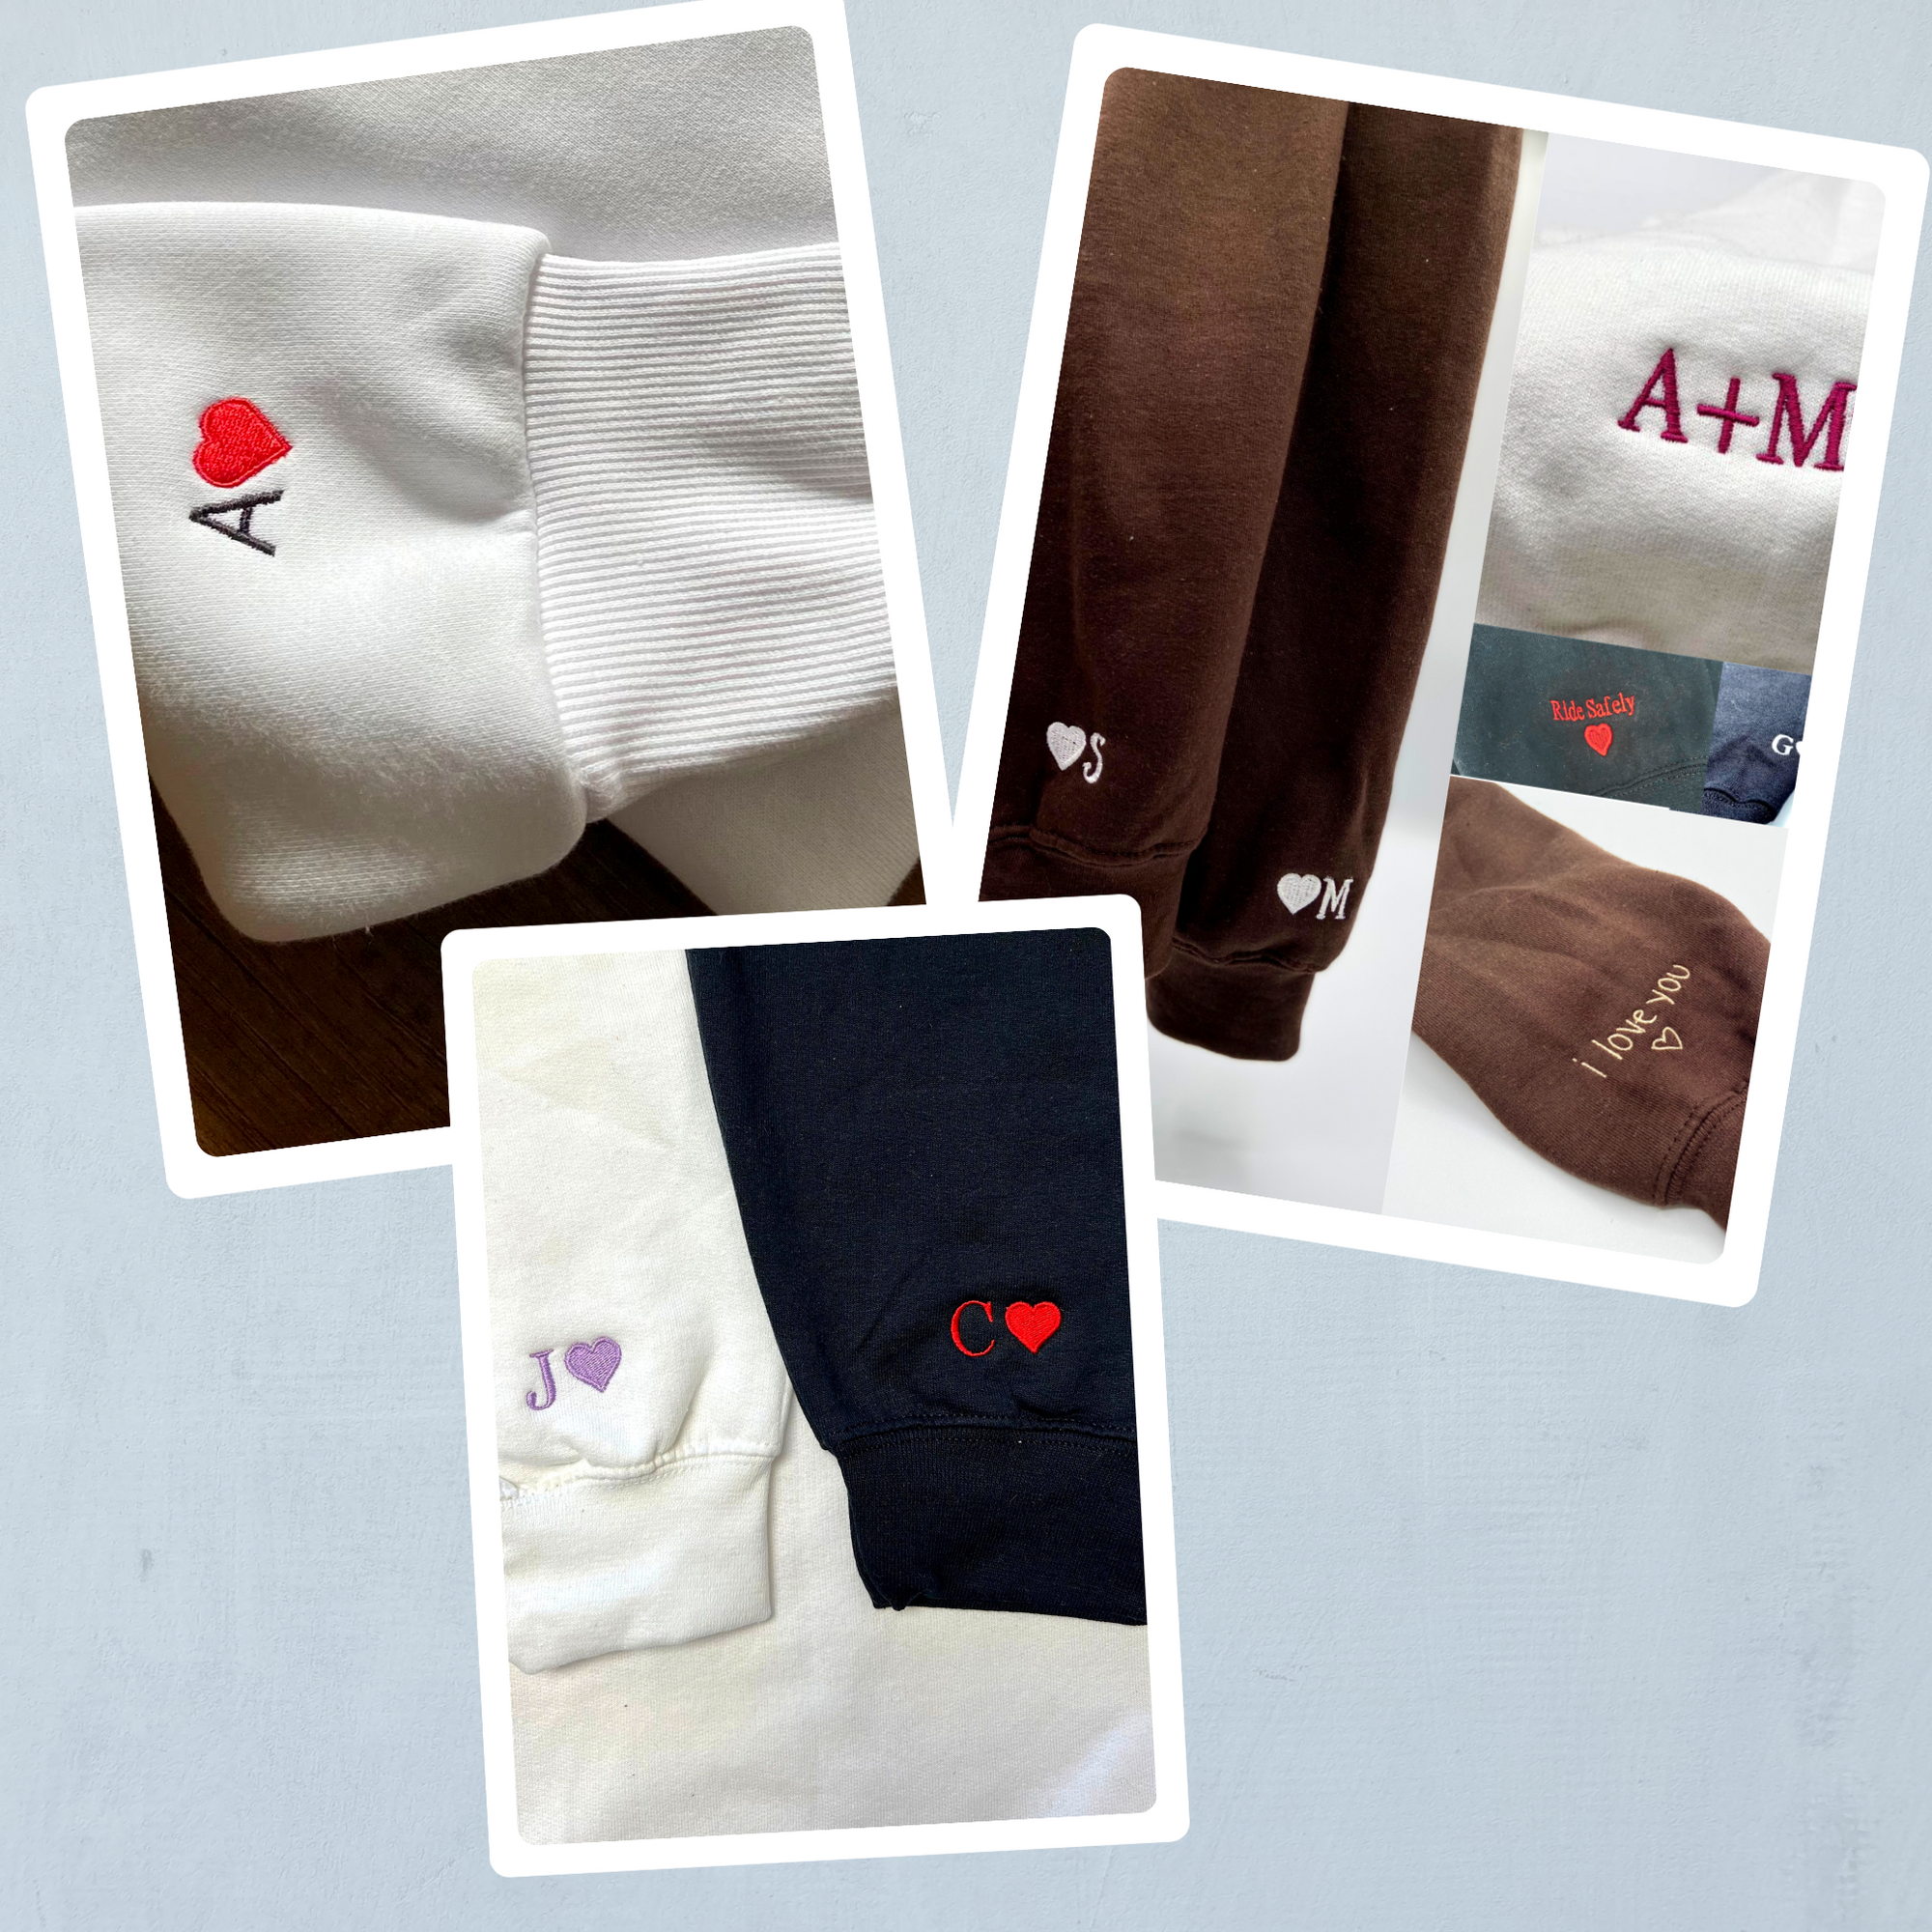 Custom Embroidered Hoodies For Couples, Personalized Couple Hoodies, His Her Hoodies, Cute Snow Prince x Princess Couples Embroidered Hoodie